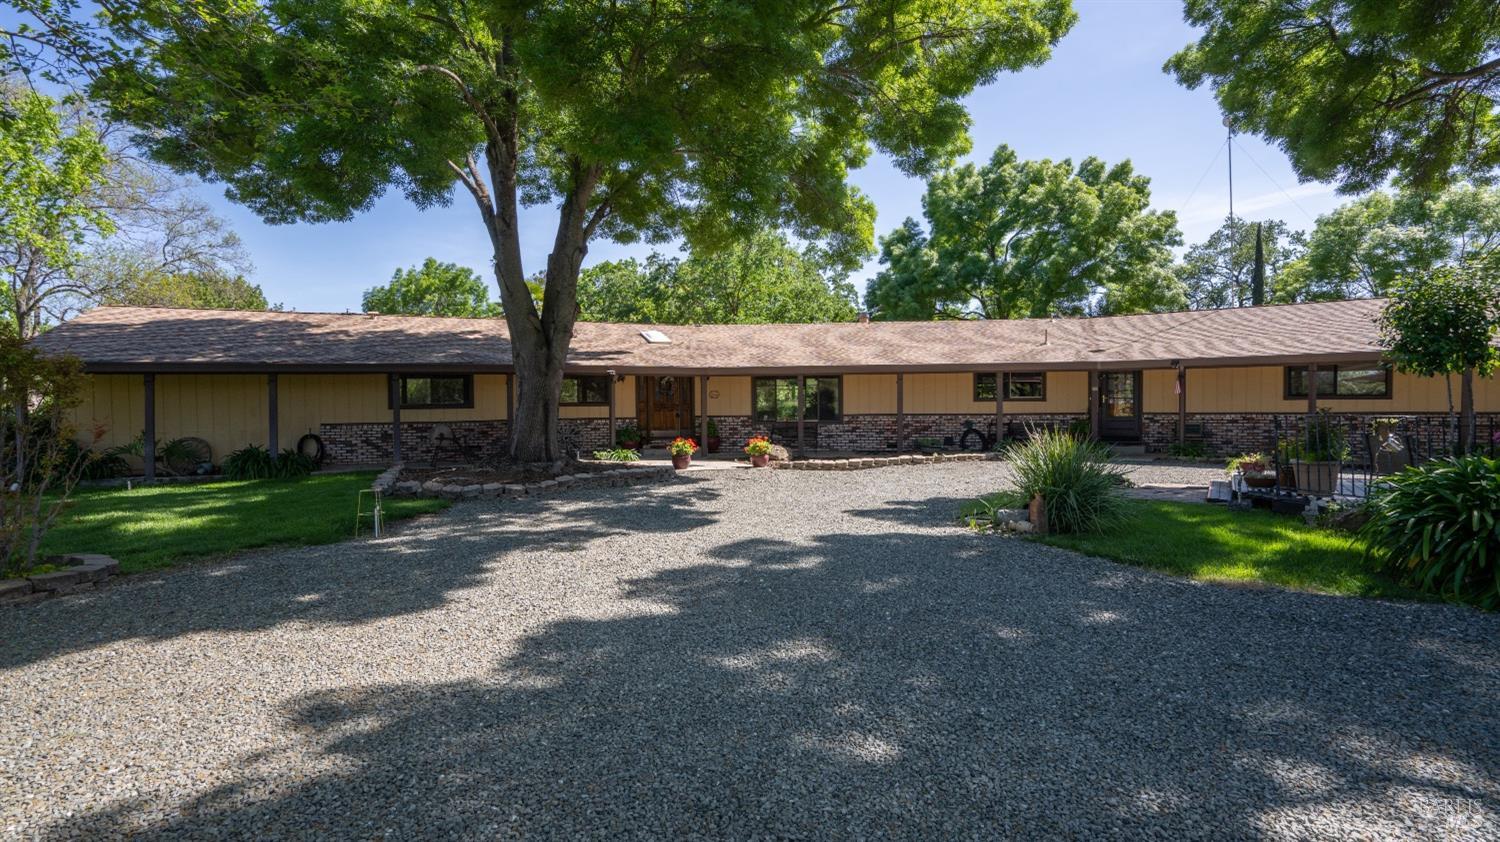 4384 Peaceful Glen Road, Vacaville, California, 95688, United States, 3 Bedrooms Bedrooms, ,3 BathroomsBathrooms,Residential,For Sale,4384 Peaceful Glen Road,1504451